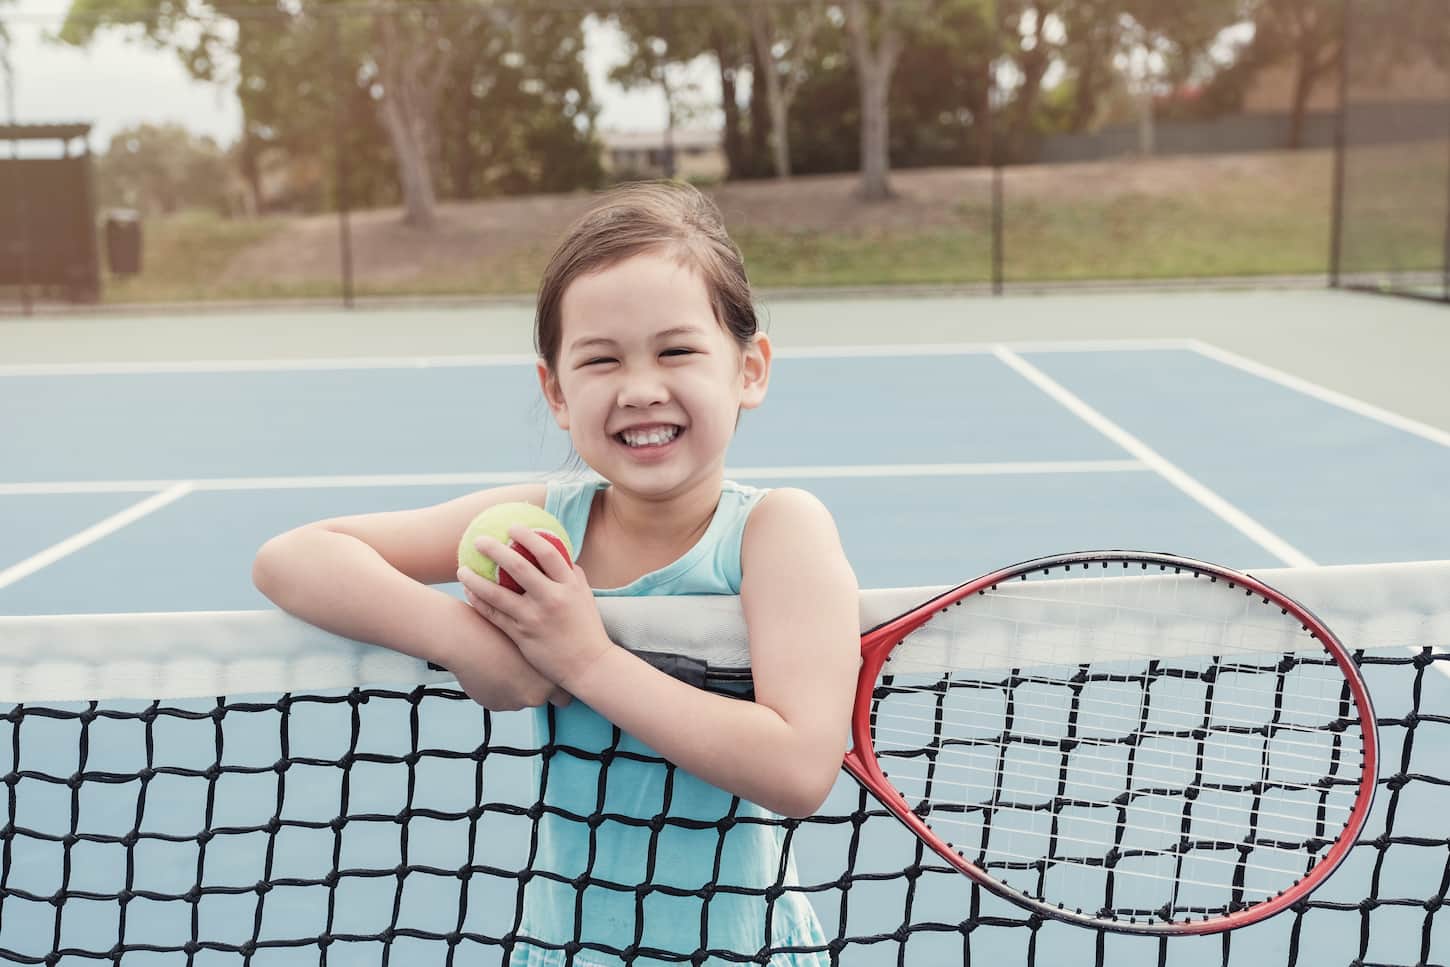 An image of a Young Asian girl tennis player on an outdoor blue court.